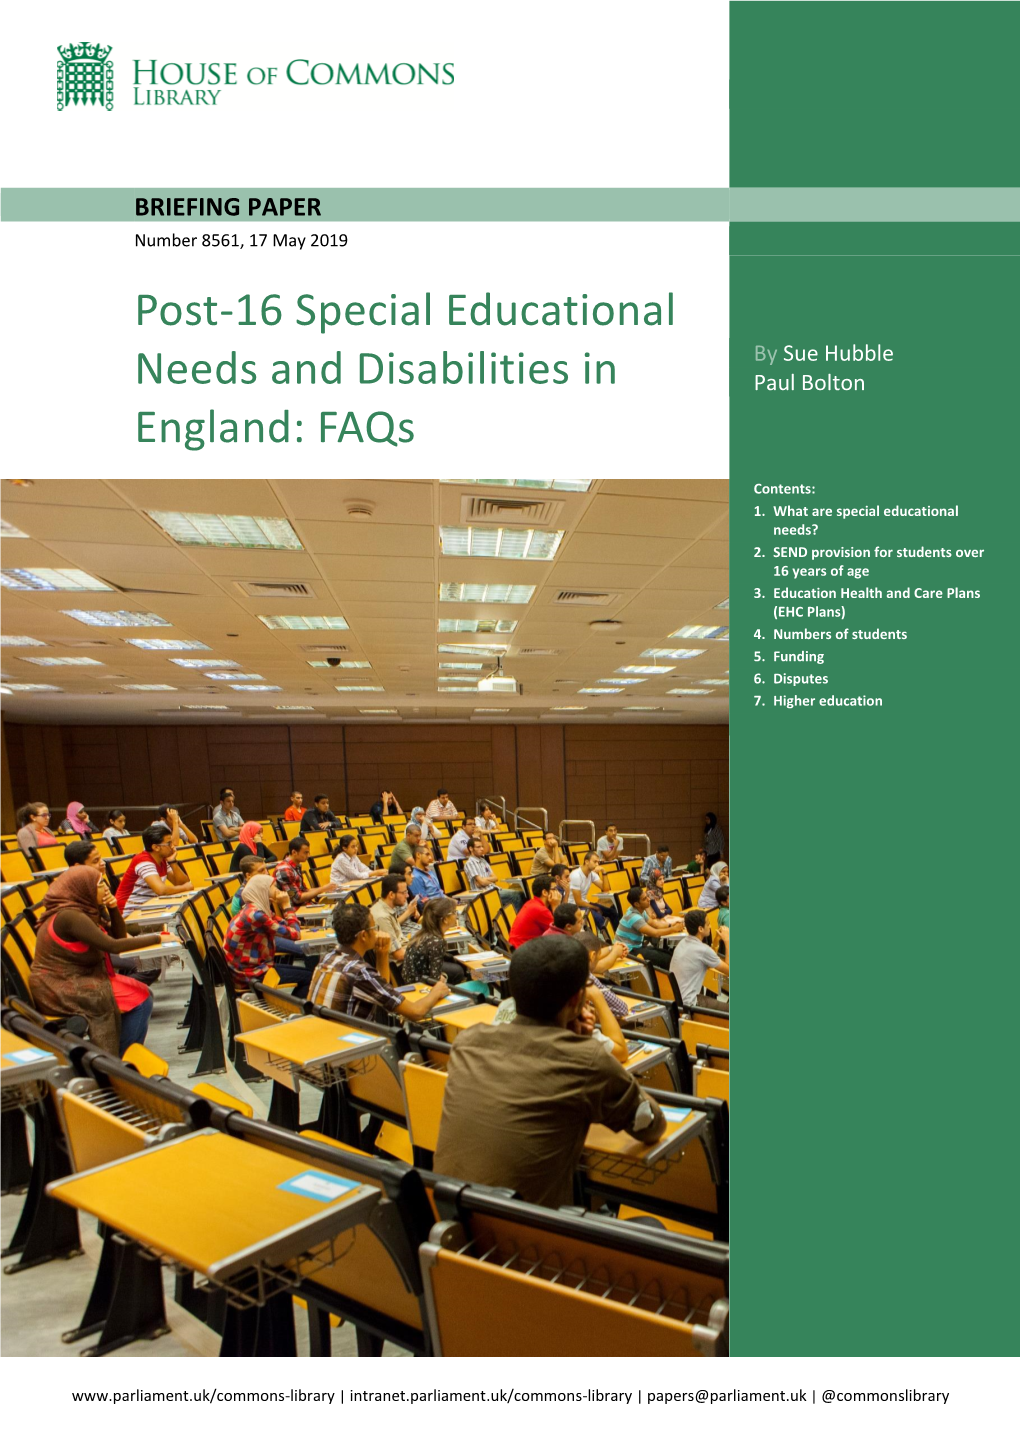 Post-16 Special Educational Needs and Disabilities in England: Faqs